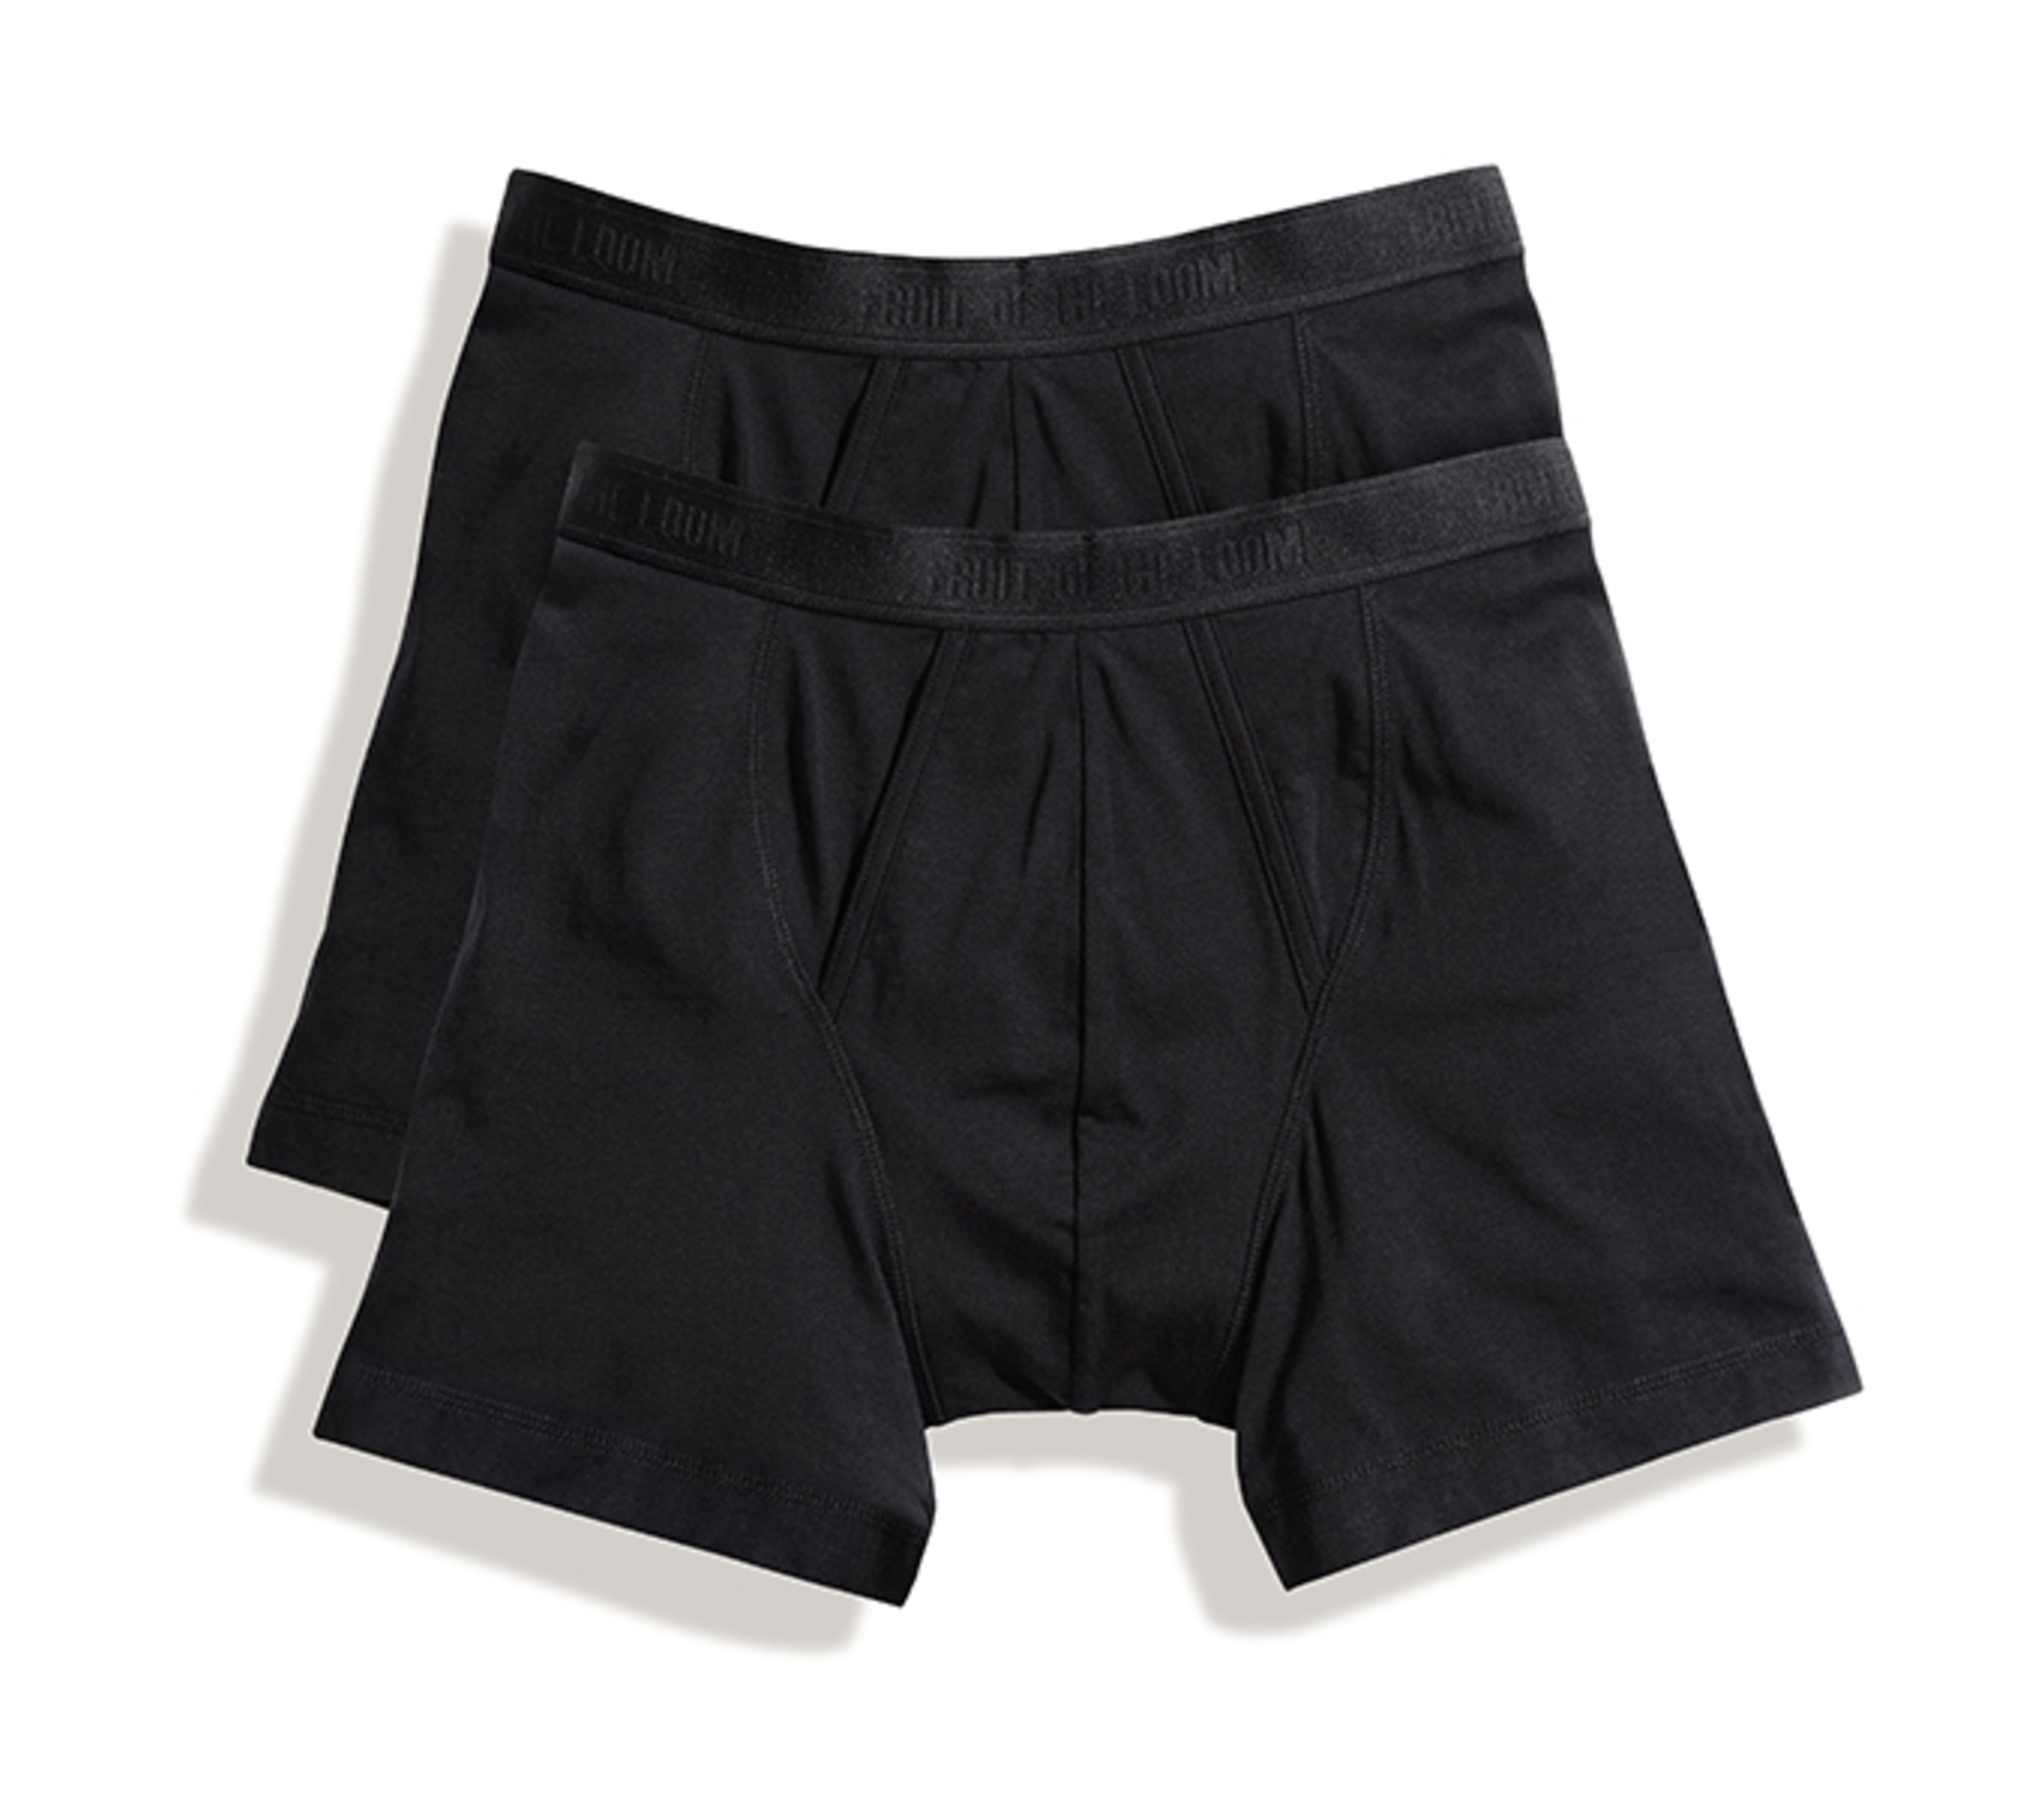 Fruit of the loom Classic Boxer 2 Pack